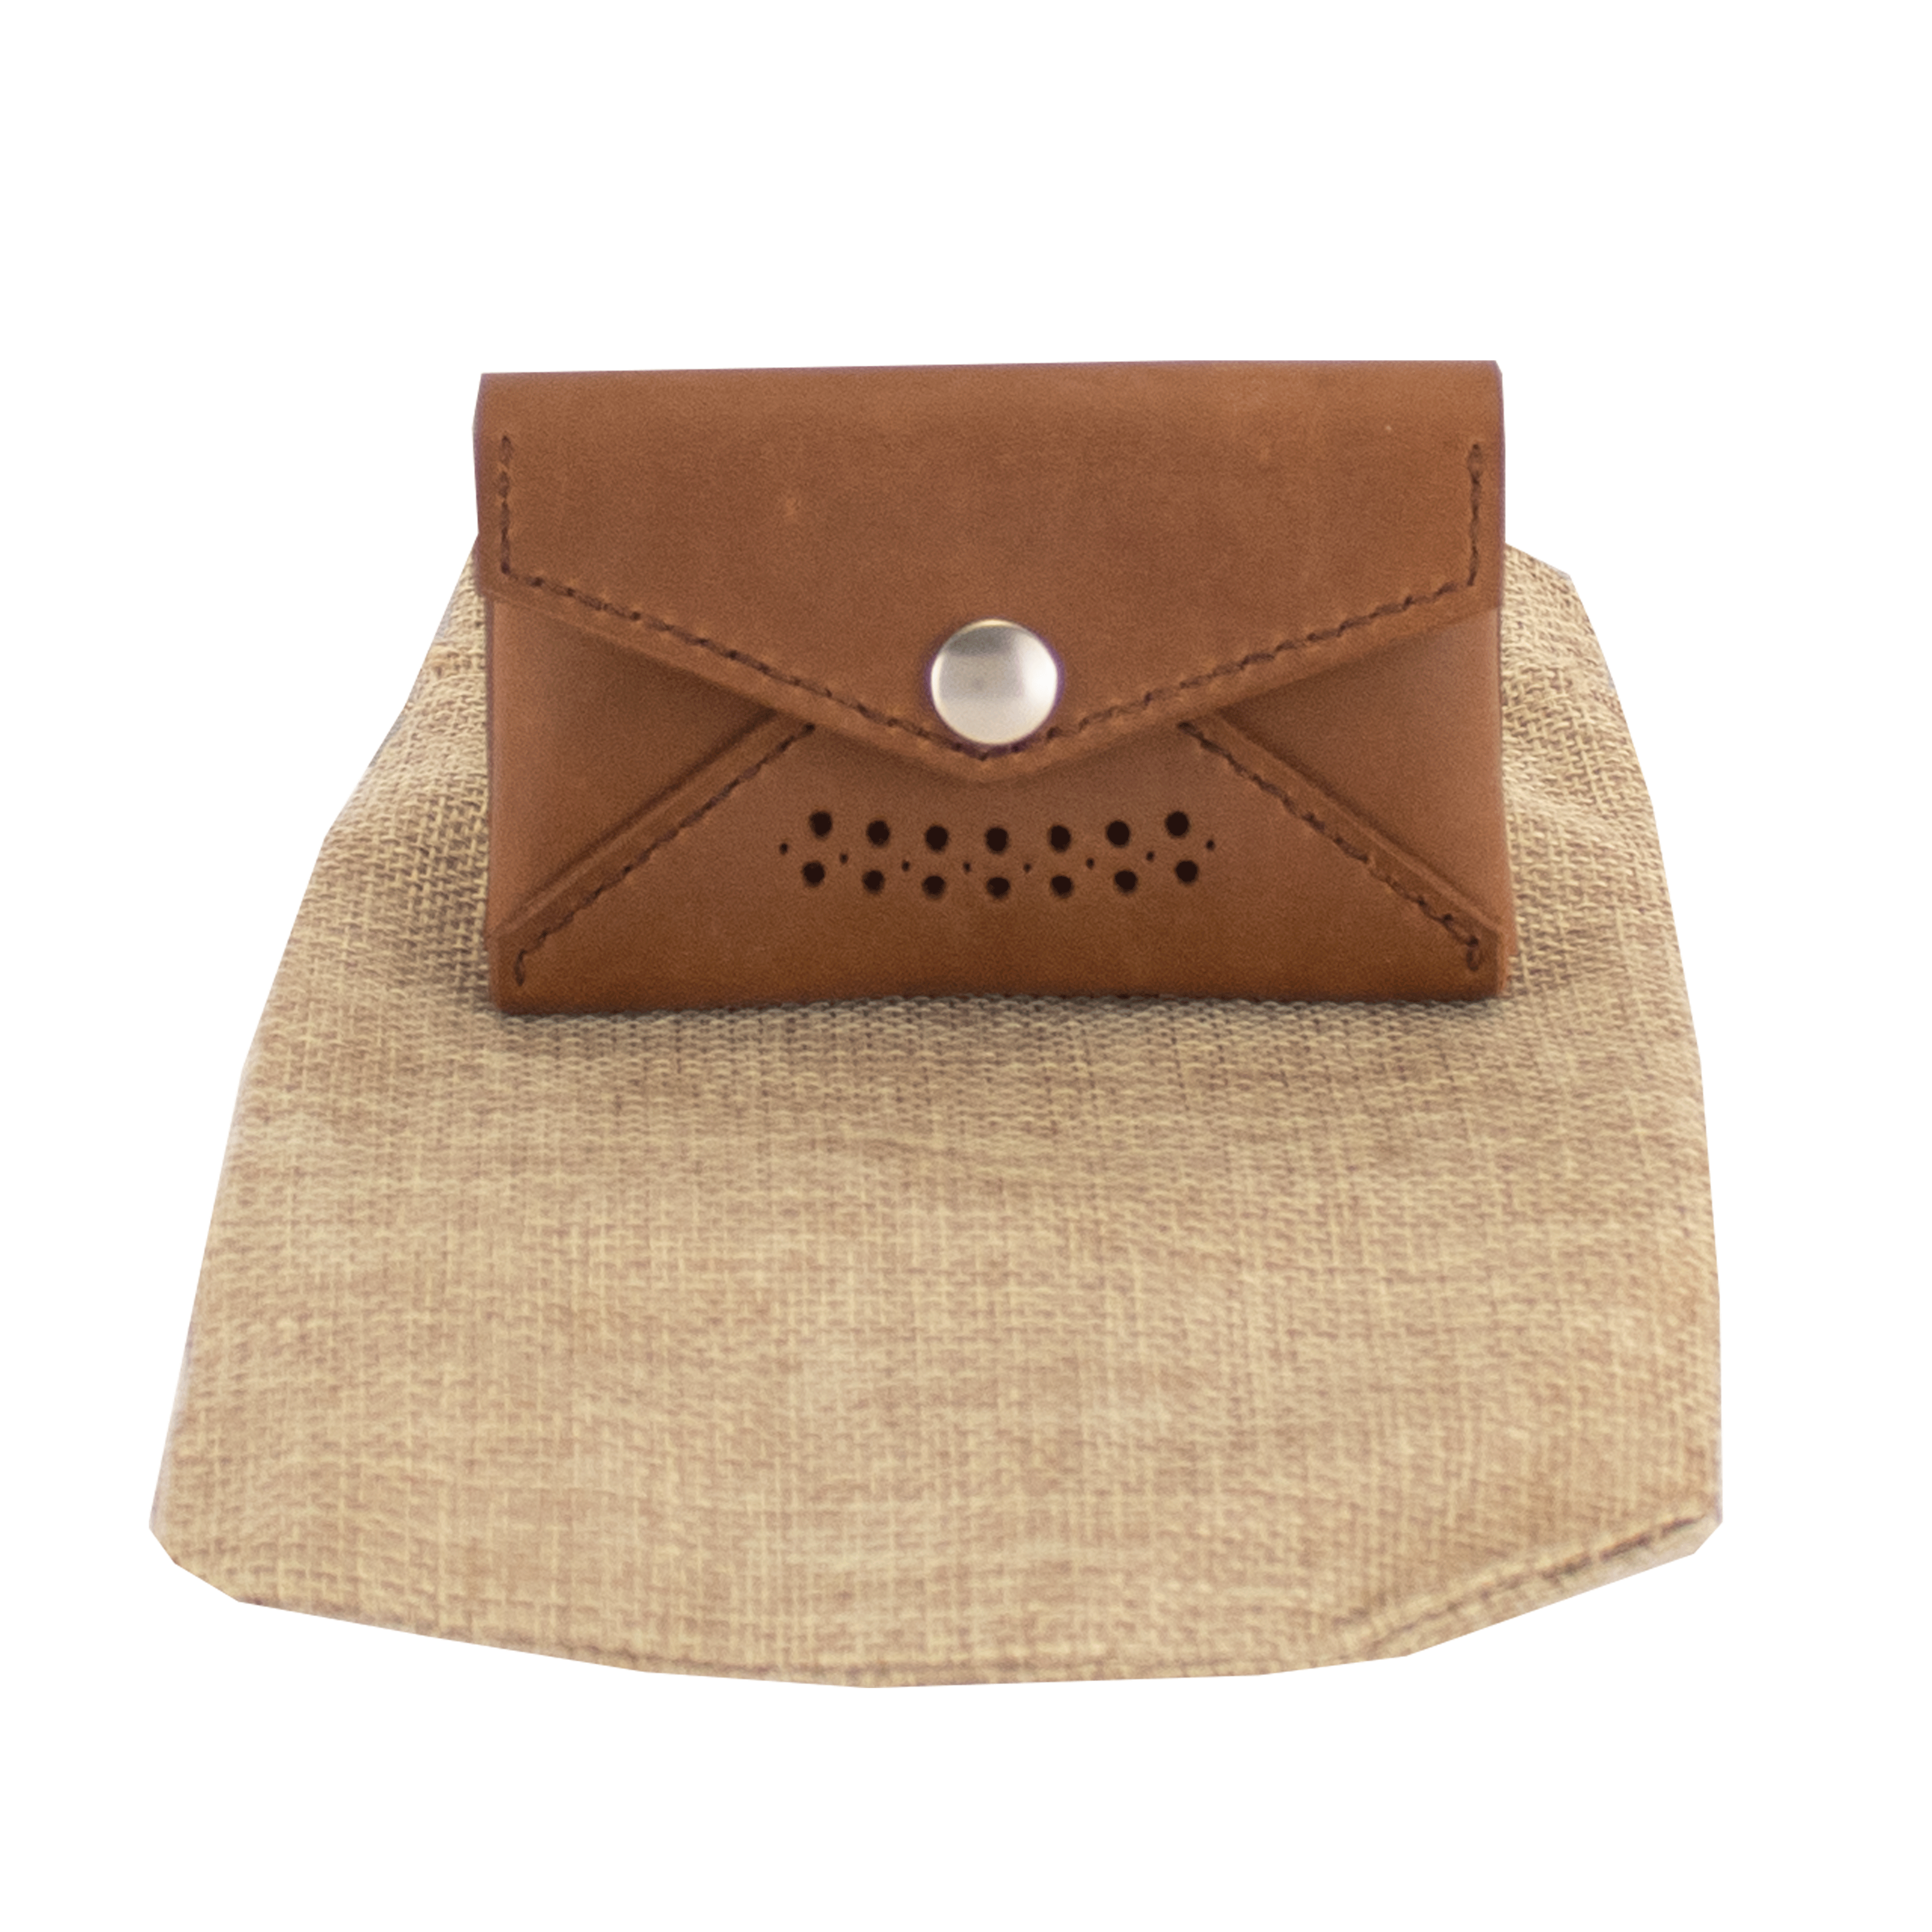 Origami Coin Pouch | Coin purse pattern, Diy coin purse, Leather coin purse